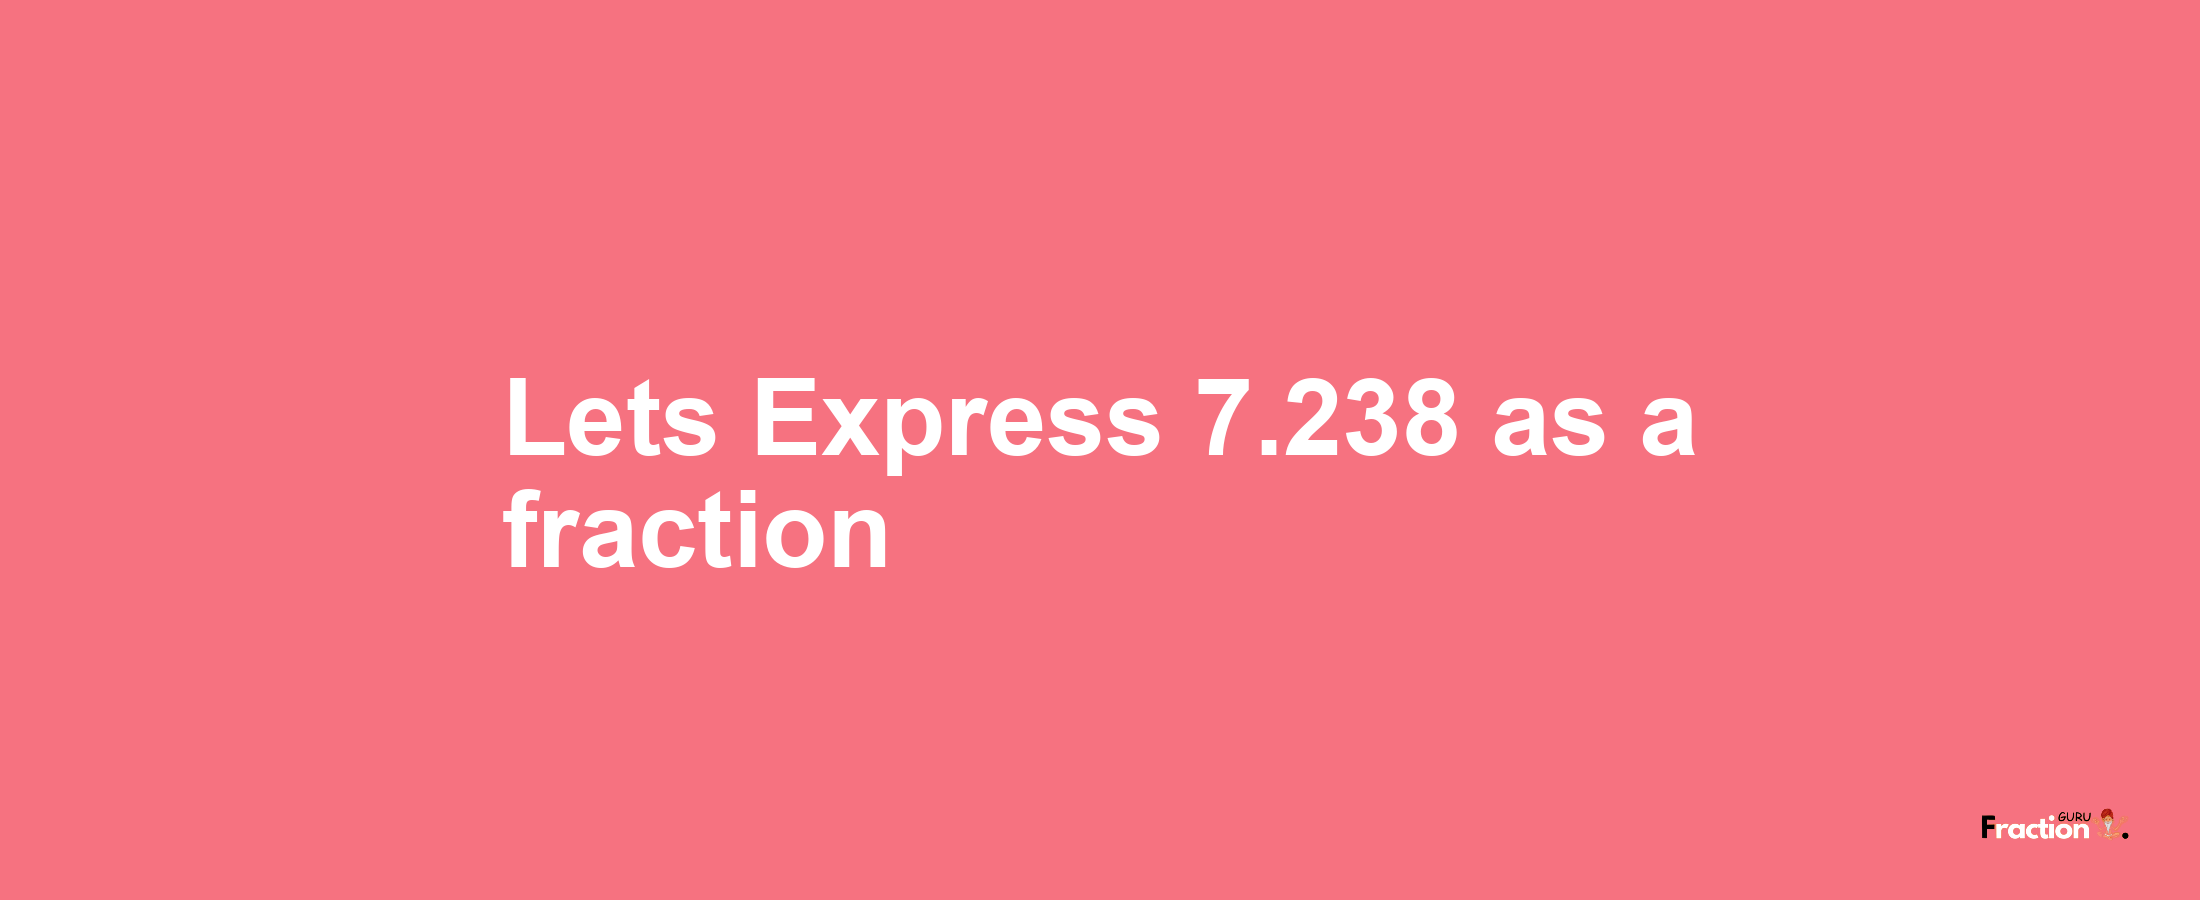 Lets Express 7.238 as afraction